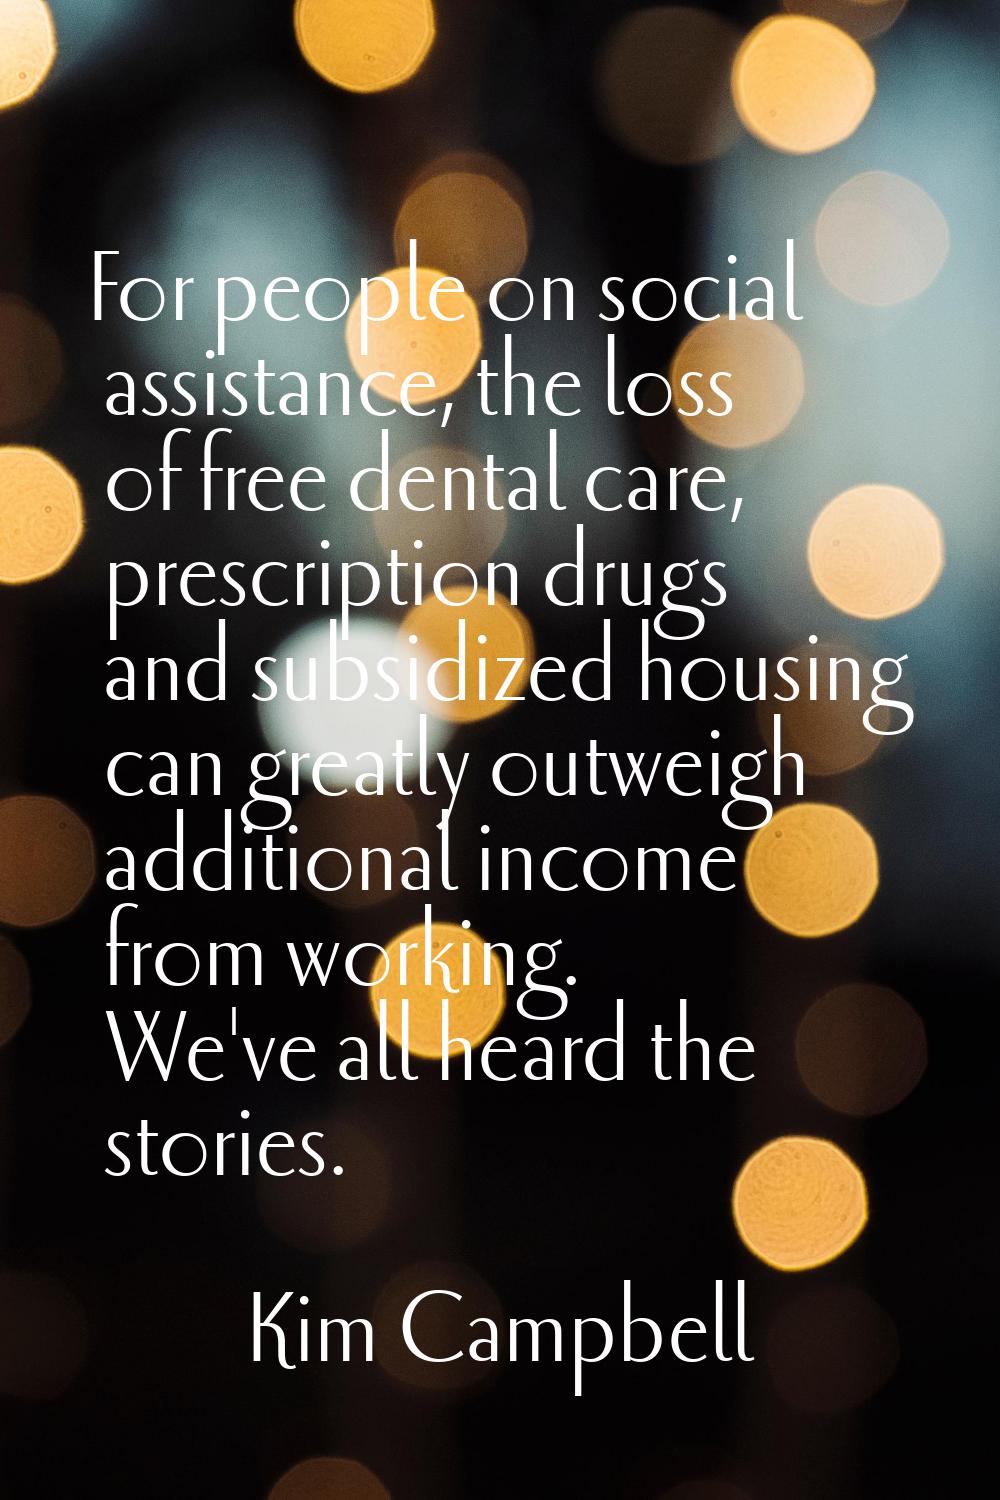 For people on social assistance, the loss of free dental care, prescription drugs and subsidized ho